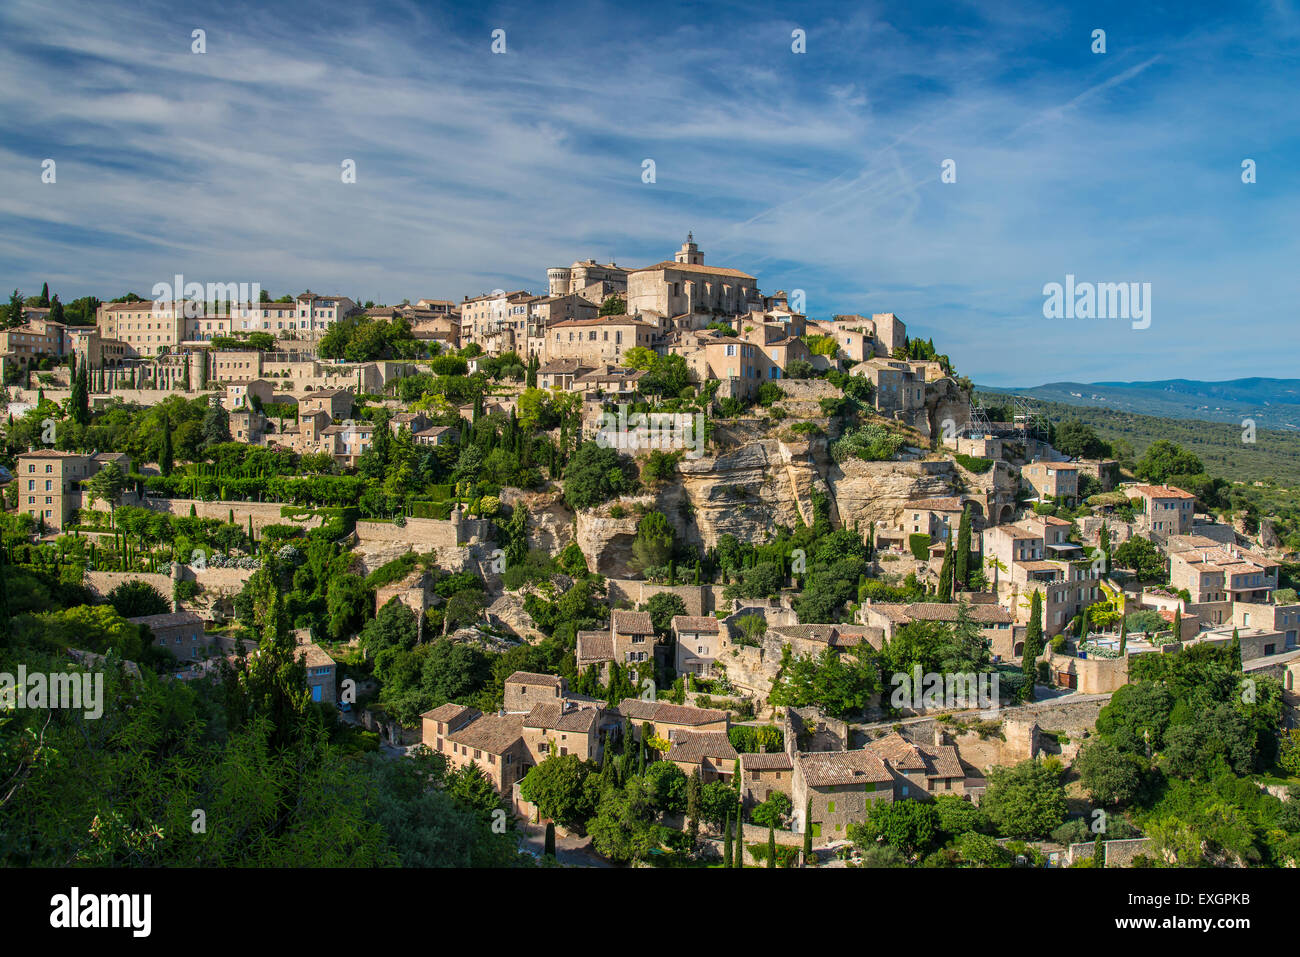 View over the village of Gordes, Vaucluse, Provence, France Stock Photo